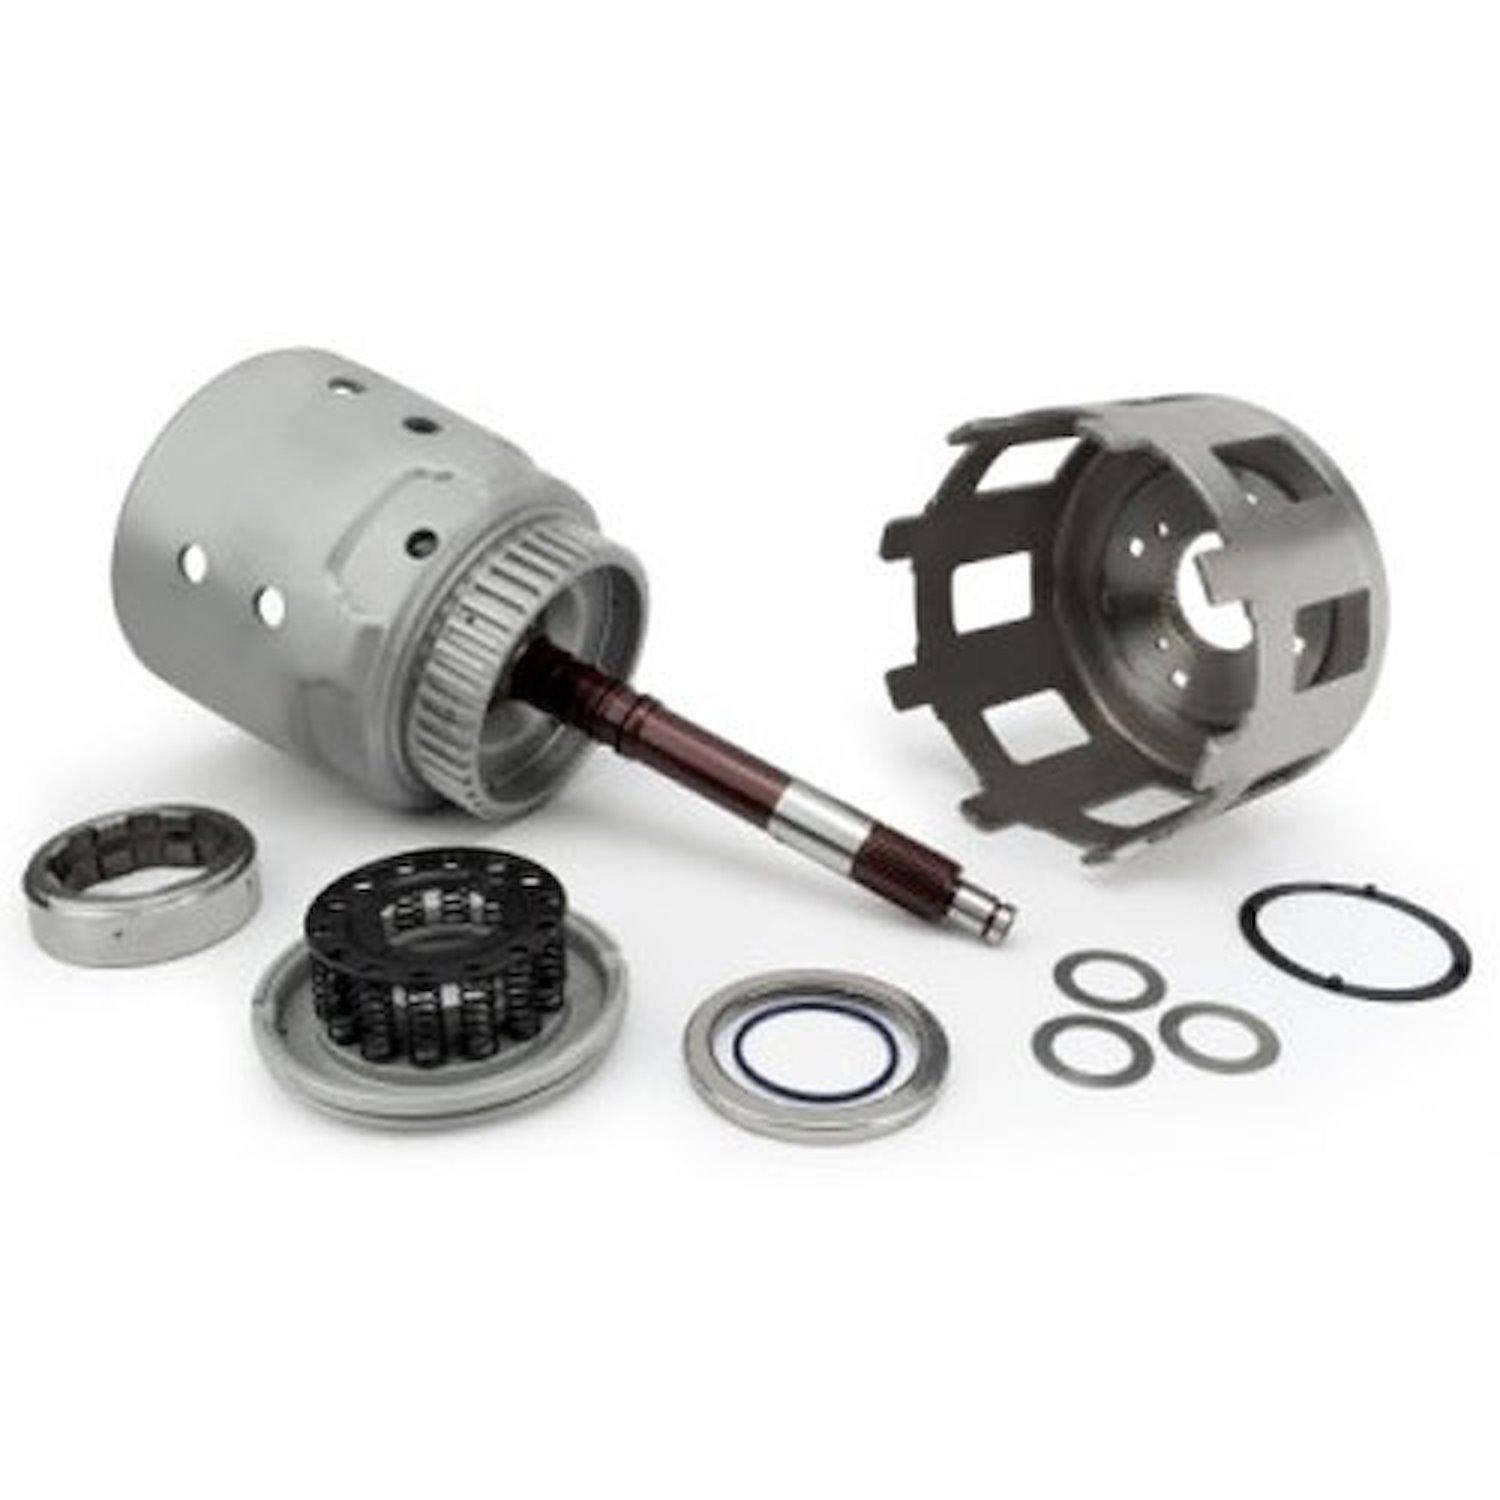 Heavy-Duty Input Shaft & Drum Assembly 4L60E (LS Engines)